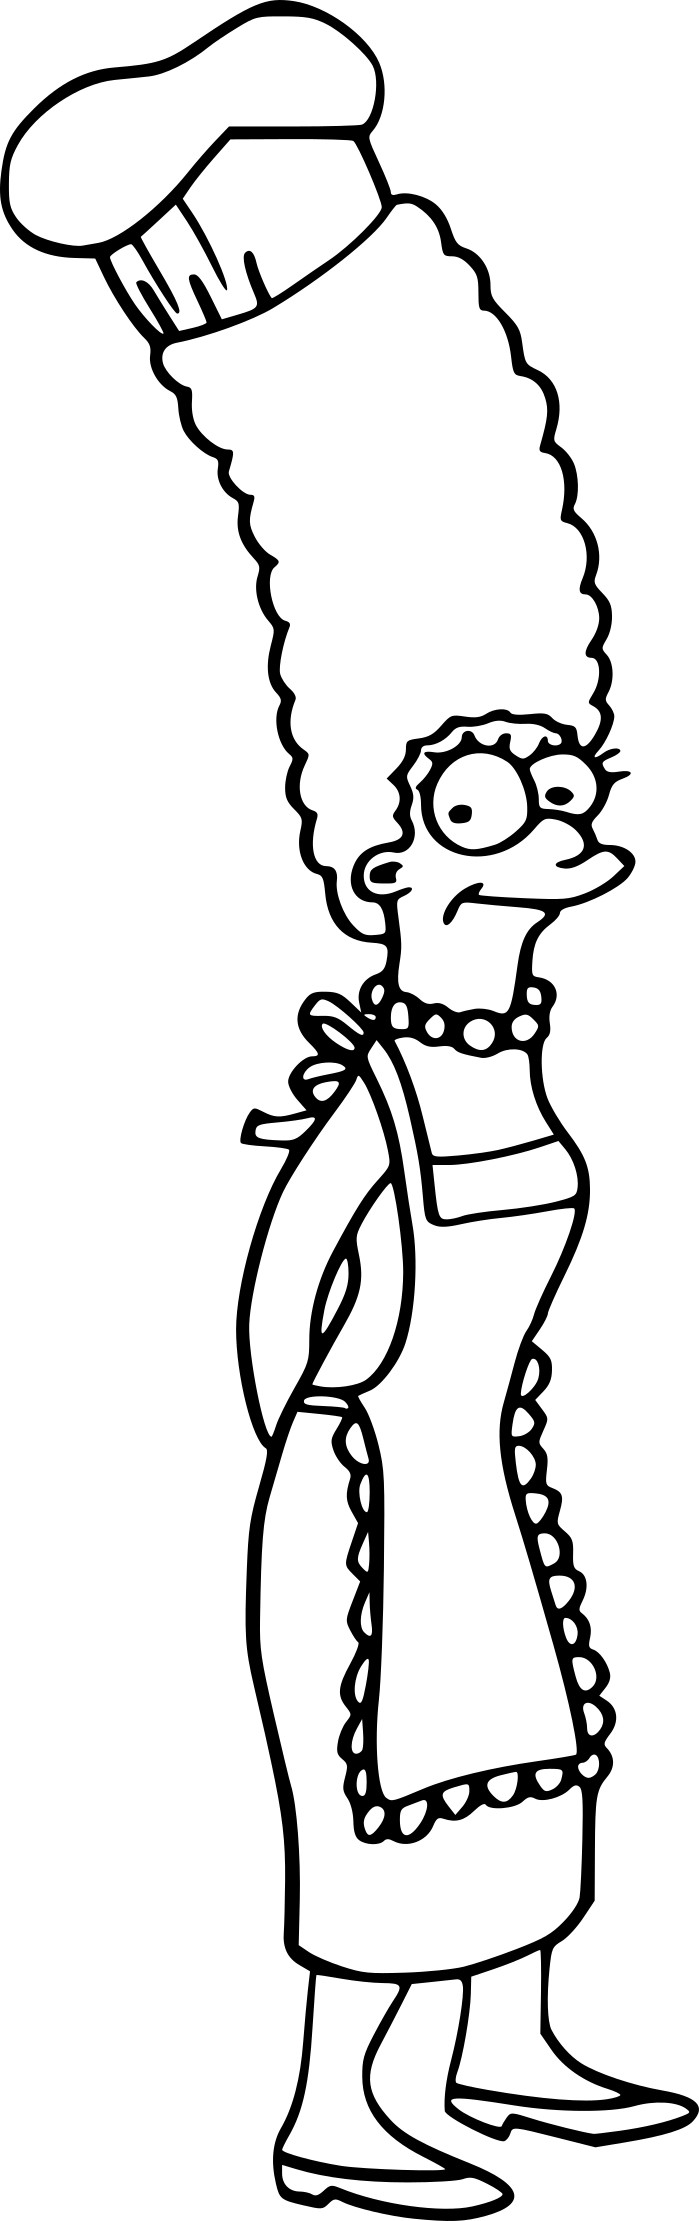 Marge Simpson drawing and coloring page